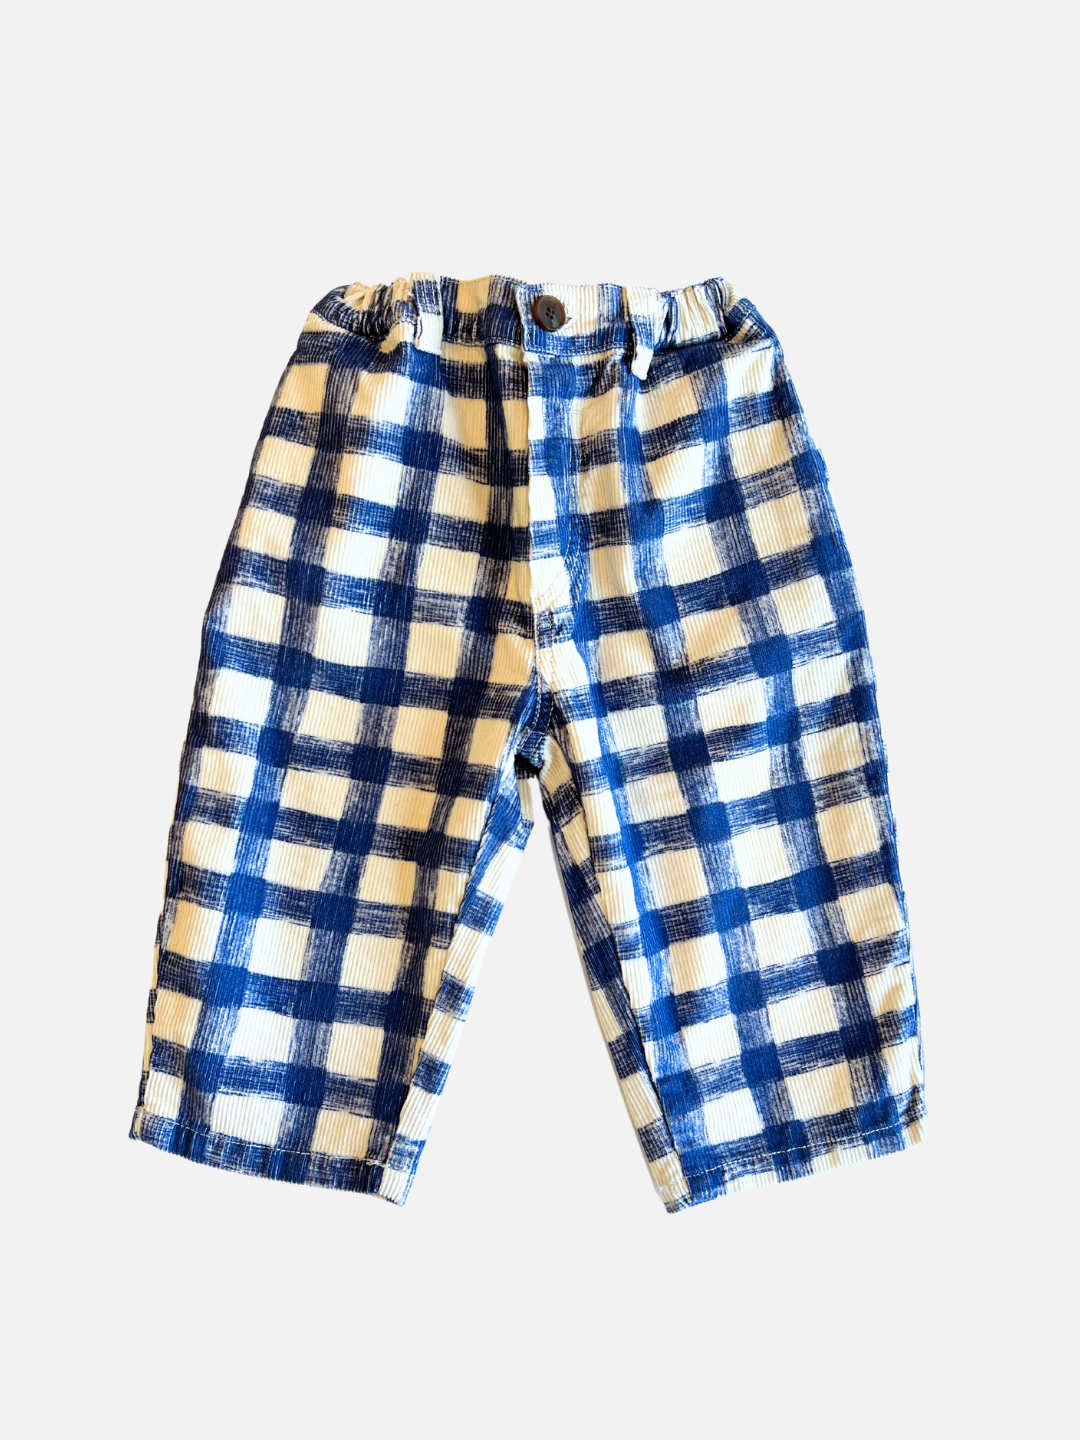 Front view of kids corduroy trousers in white with a large blue grid check pattern.